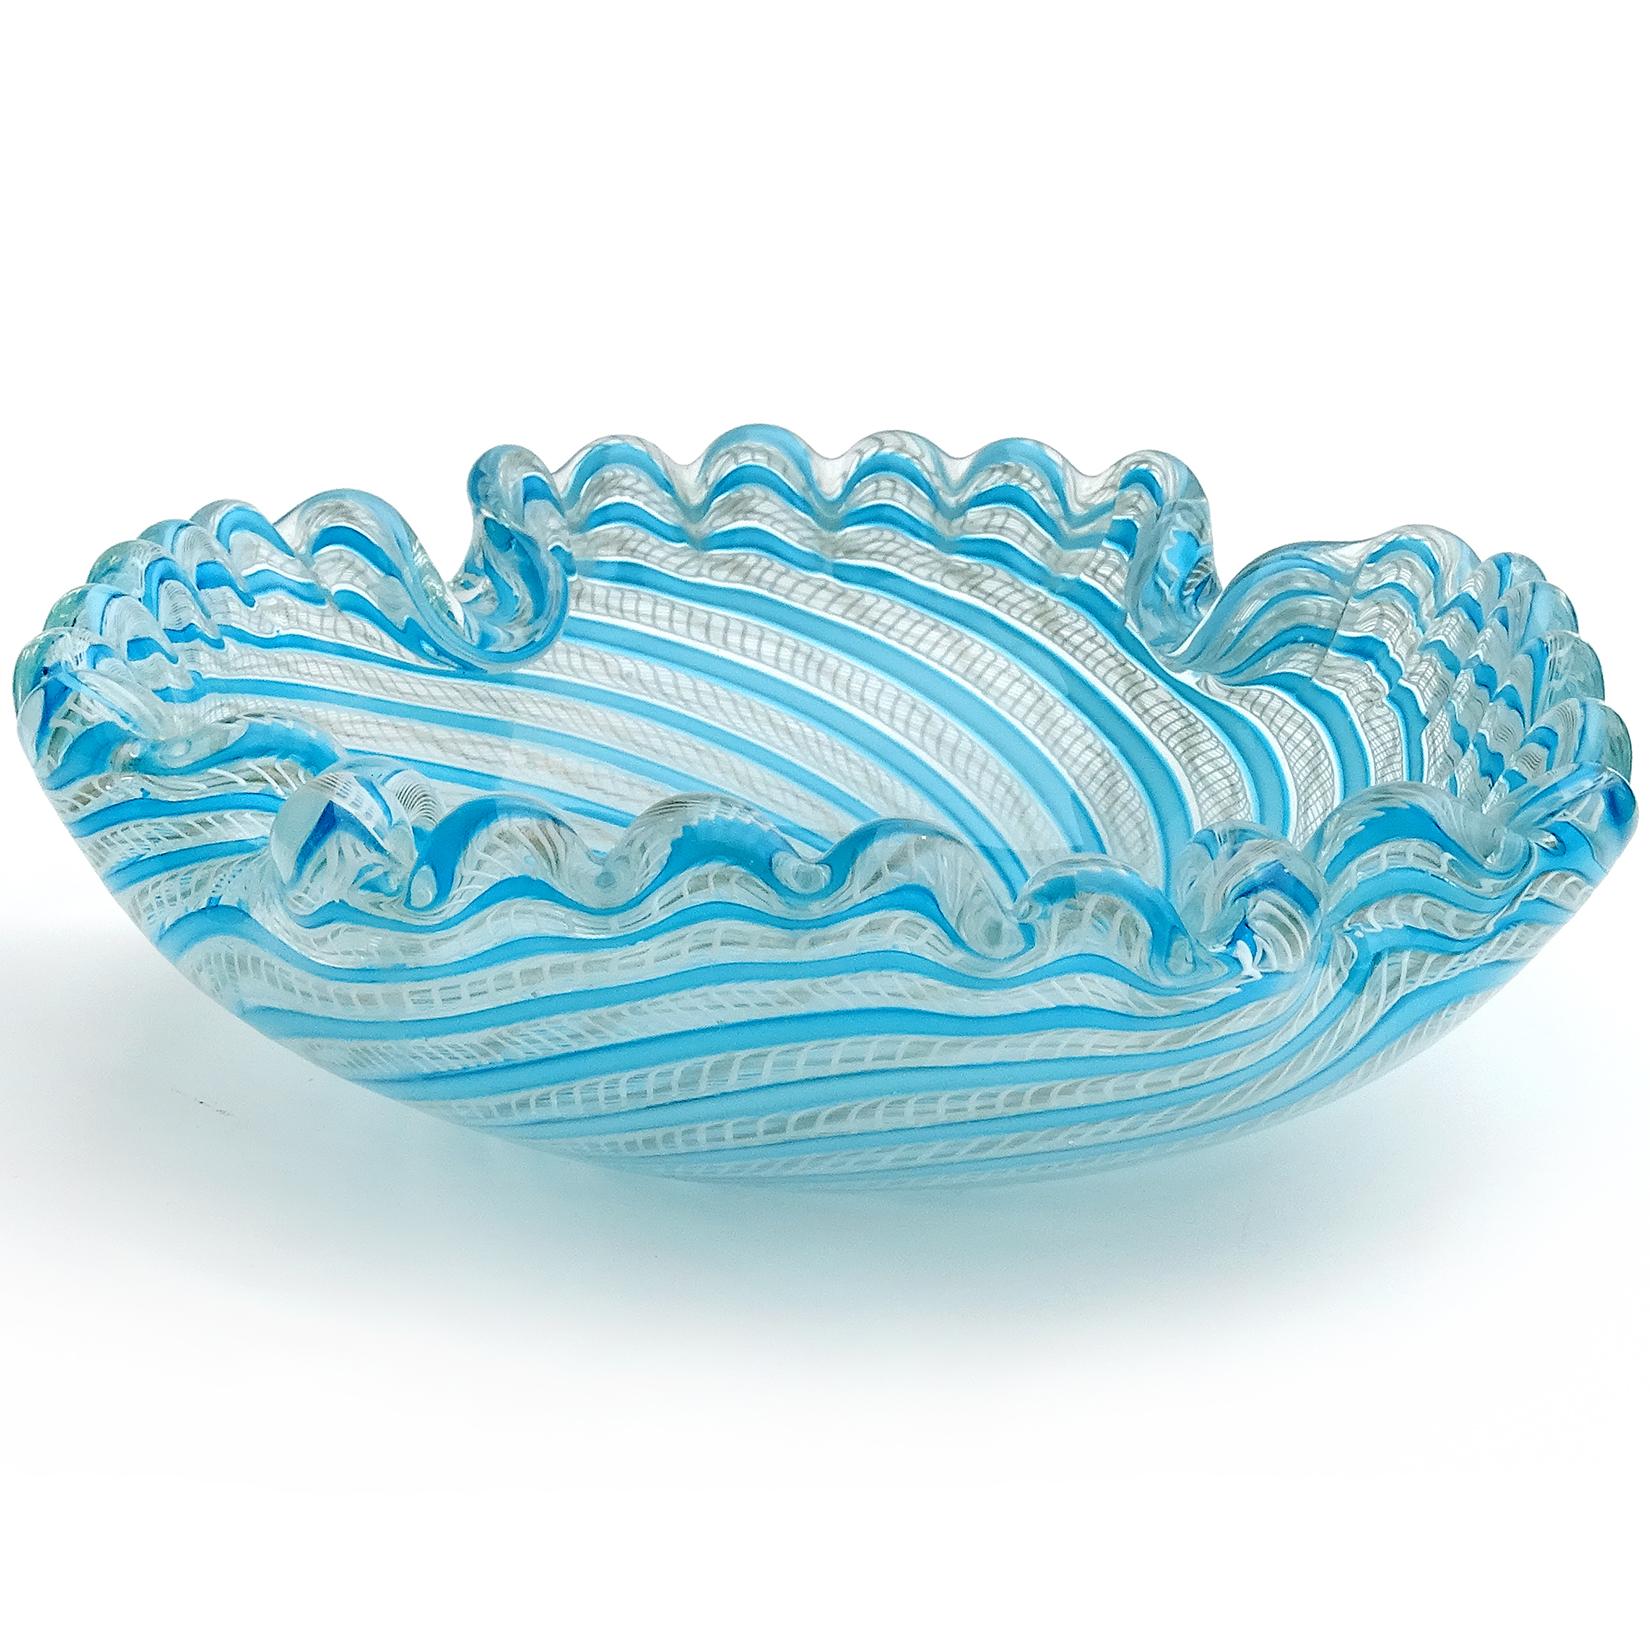 Beautiful vintage Murano hand blown blue ribbons, white Zanfirico with aventurine Italian art glass decorative bowl. Documented to the Fratelli Toso Company. The piece has a scalloped rim, with squared shape and folded in corners. Can be used as a